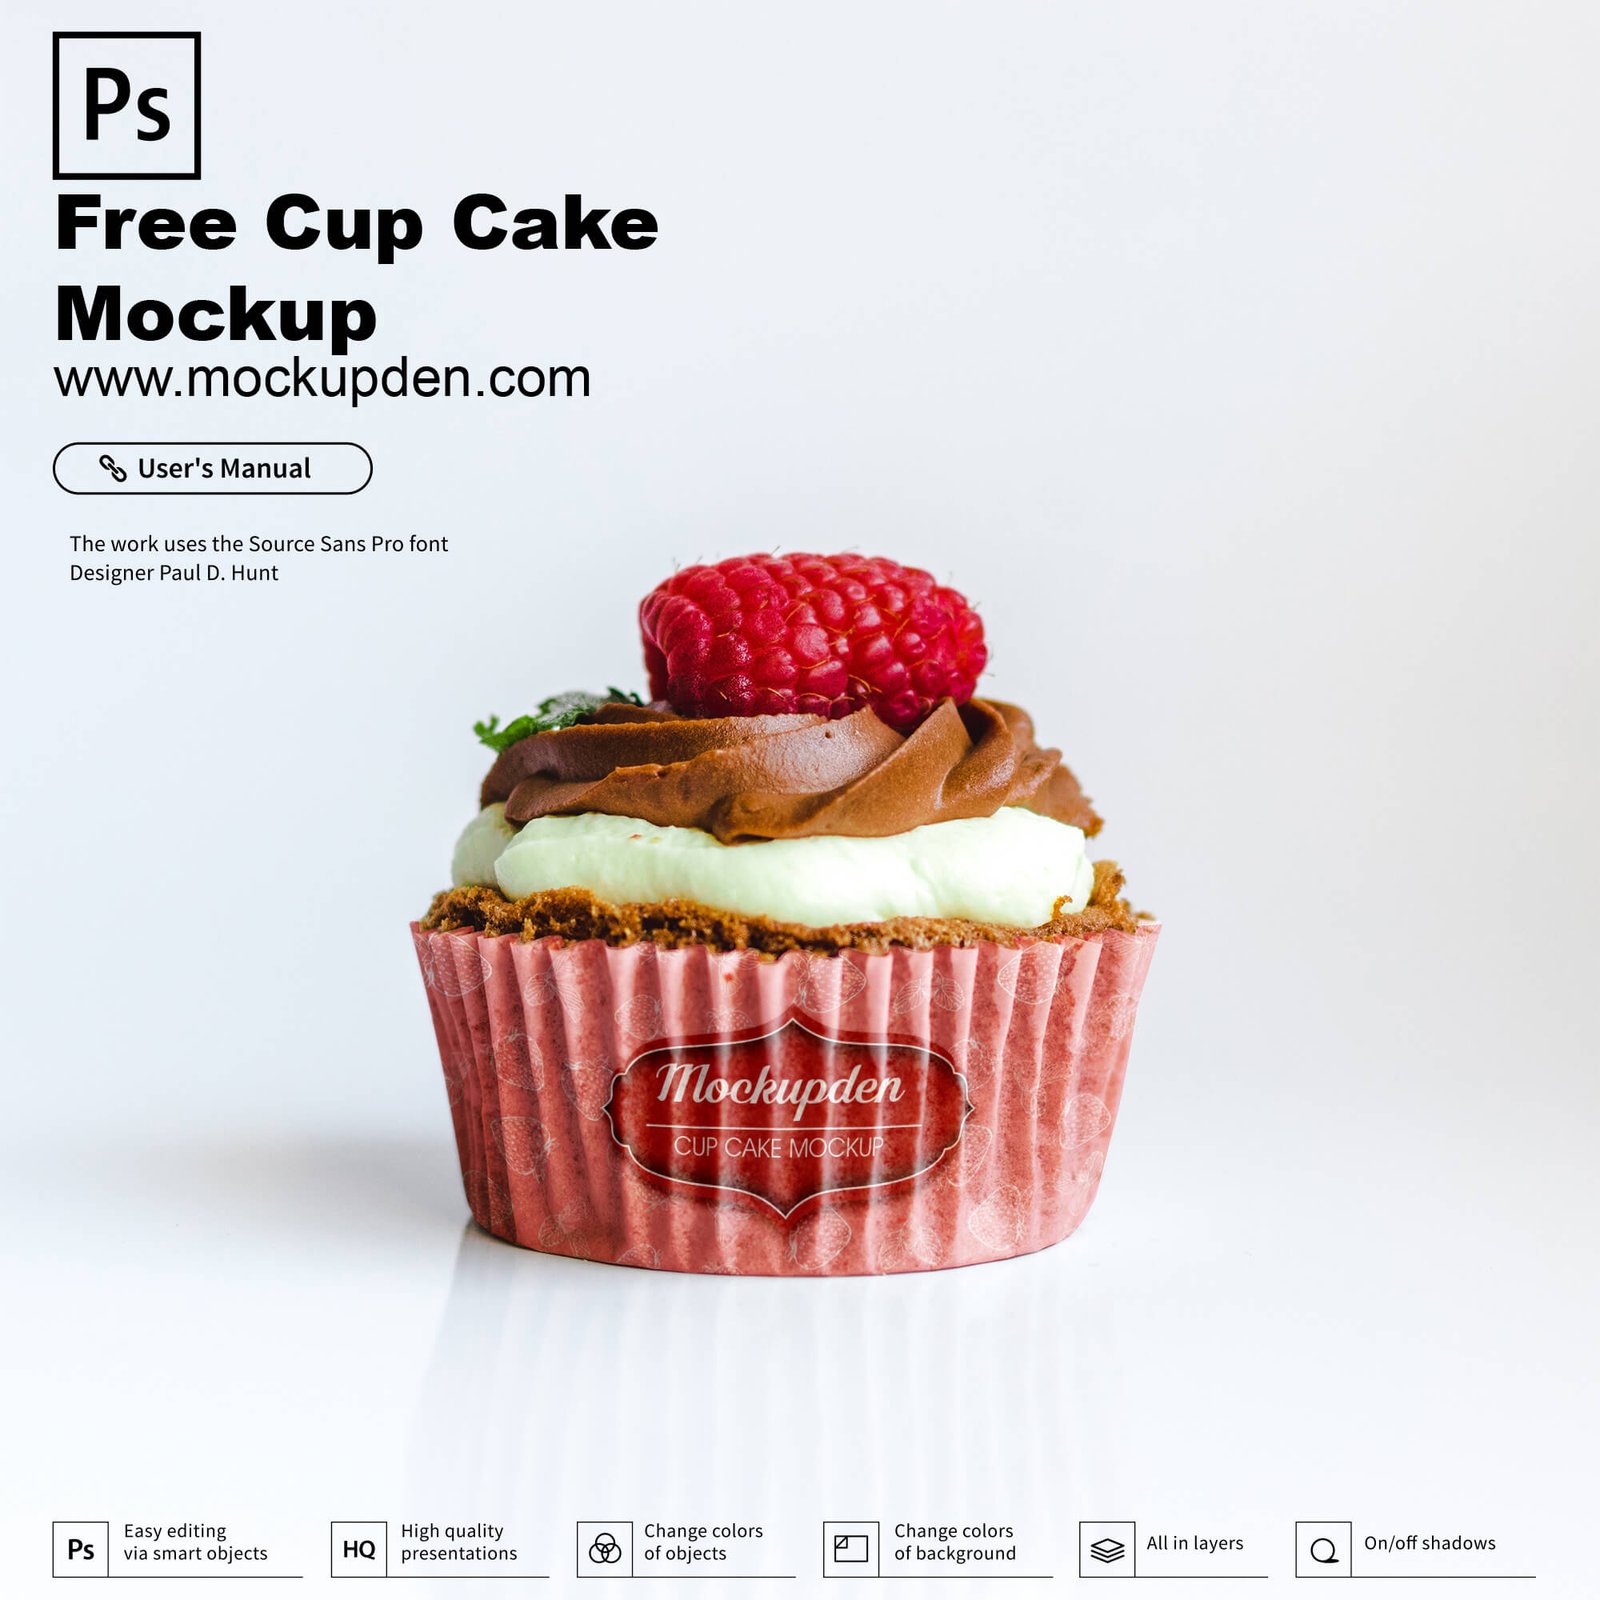 Free Cup Cake Mockup PSD Template